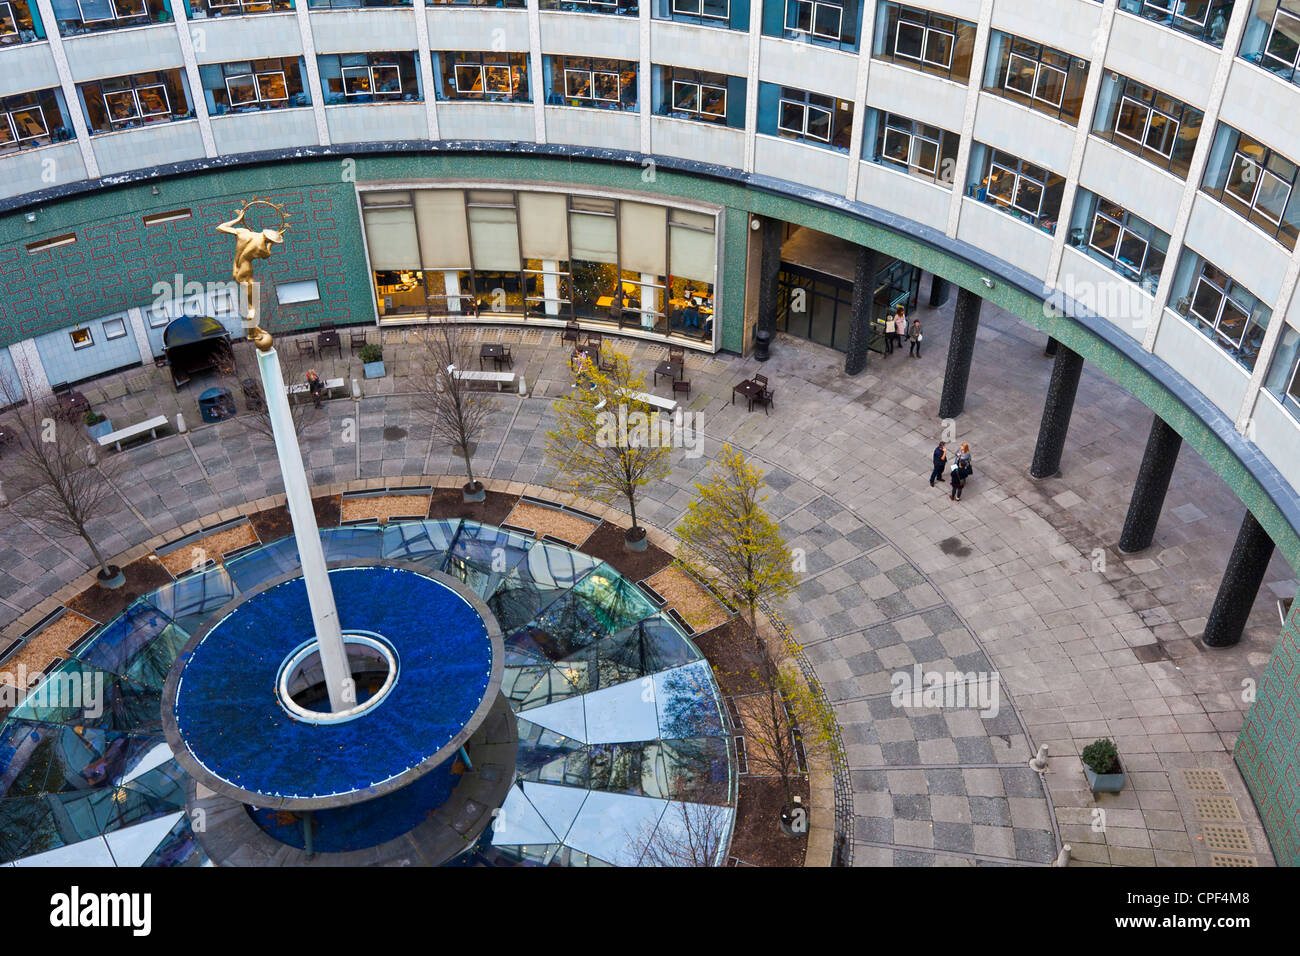 BBC Television Centre, Shepherds Bush, White City, London, looking down into central courtyard with statue of Helios. JMH6011 Stock Photo